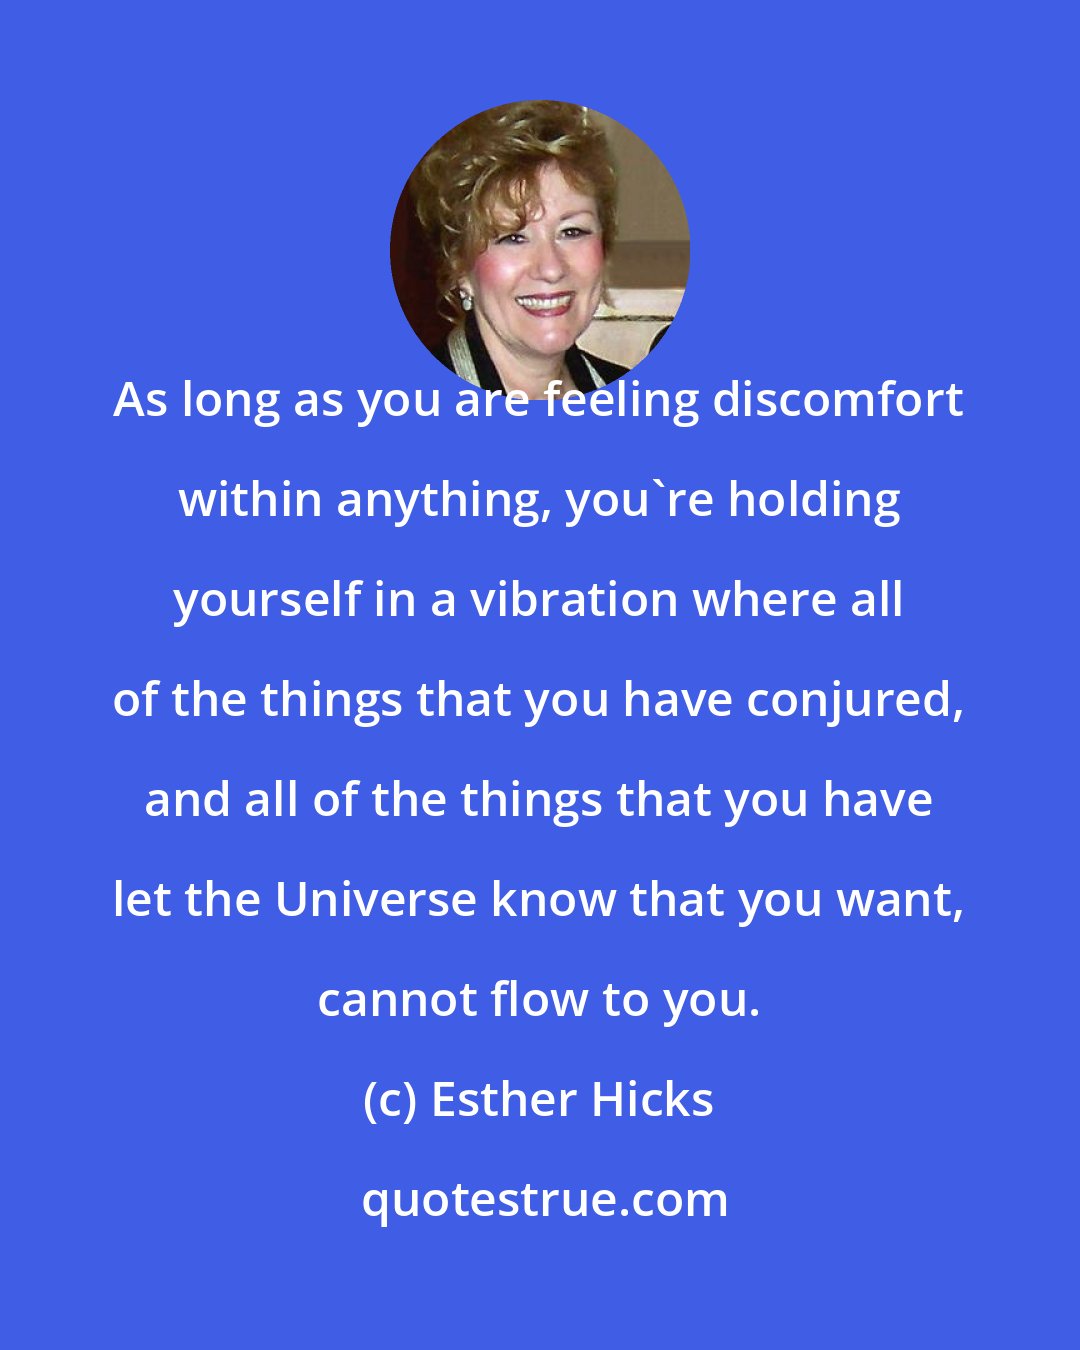 Esther Hicks: As long as you are feeling discomfort within anything, you're holding yourself in a vibration where all of the things that you have conjured, and all of the things that you have let the Universe know that you want, cannot flow to you.